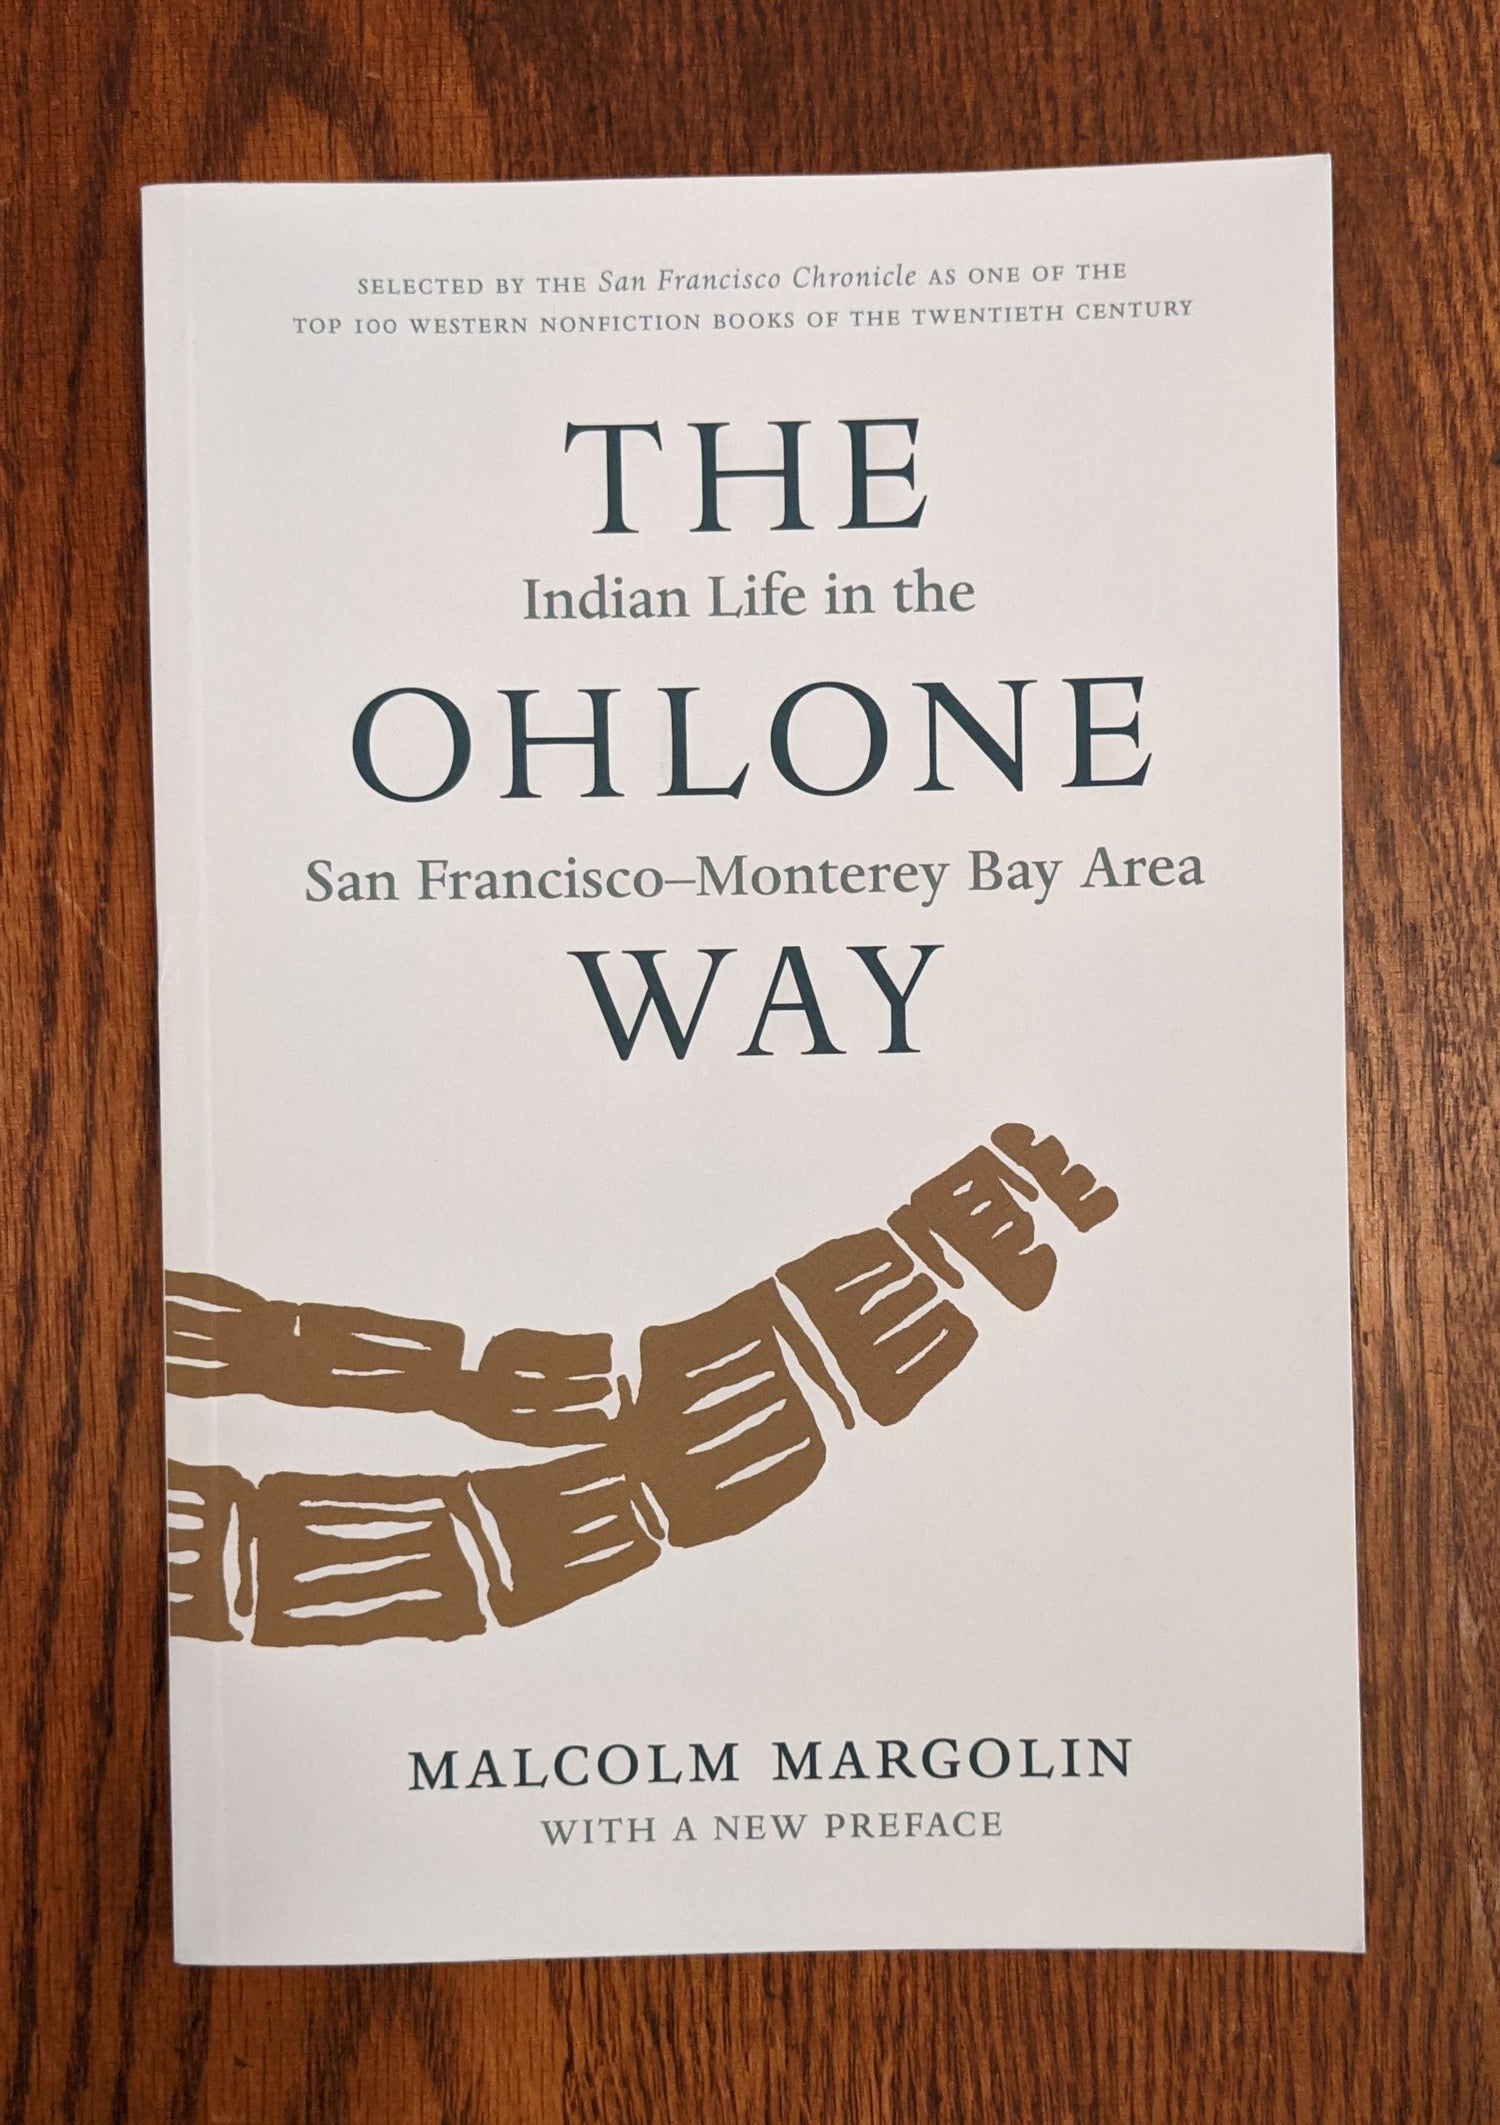 The Ohlone Way book by Malcolm Margolin